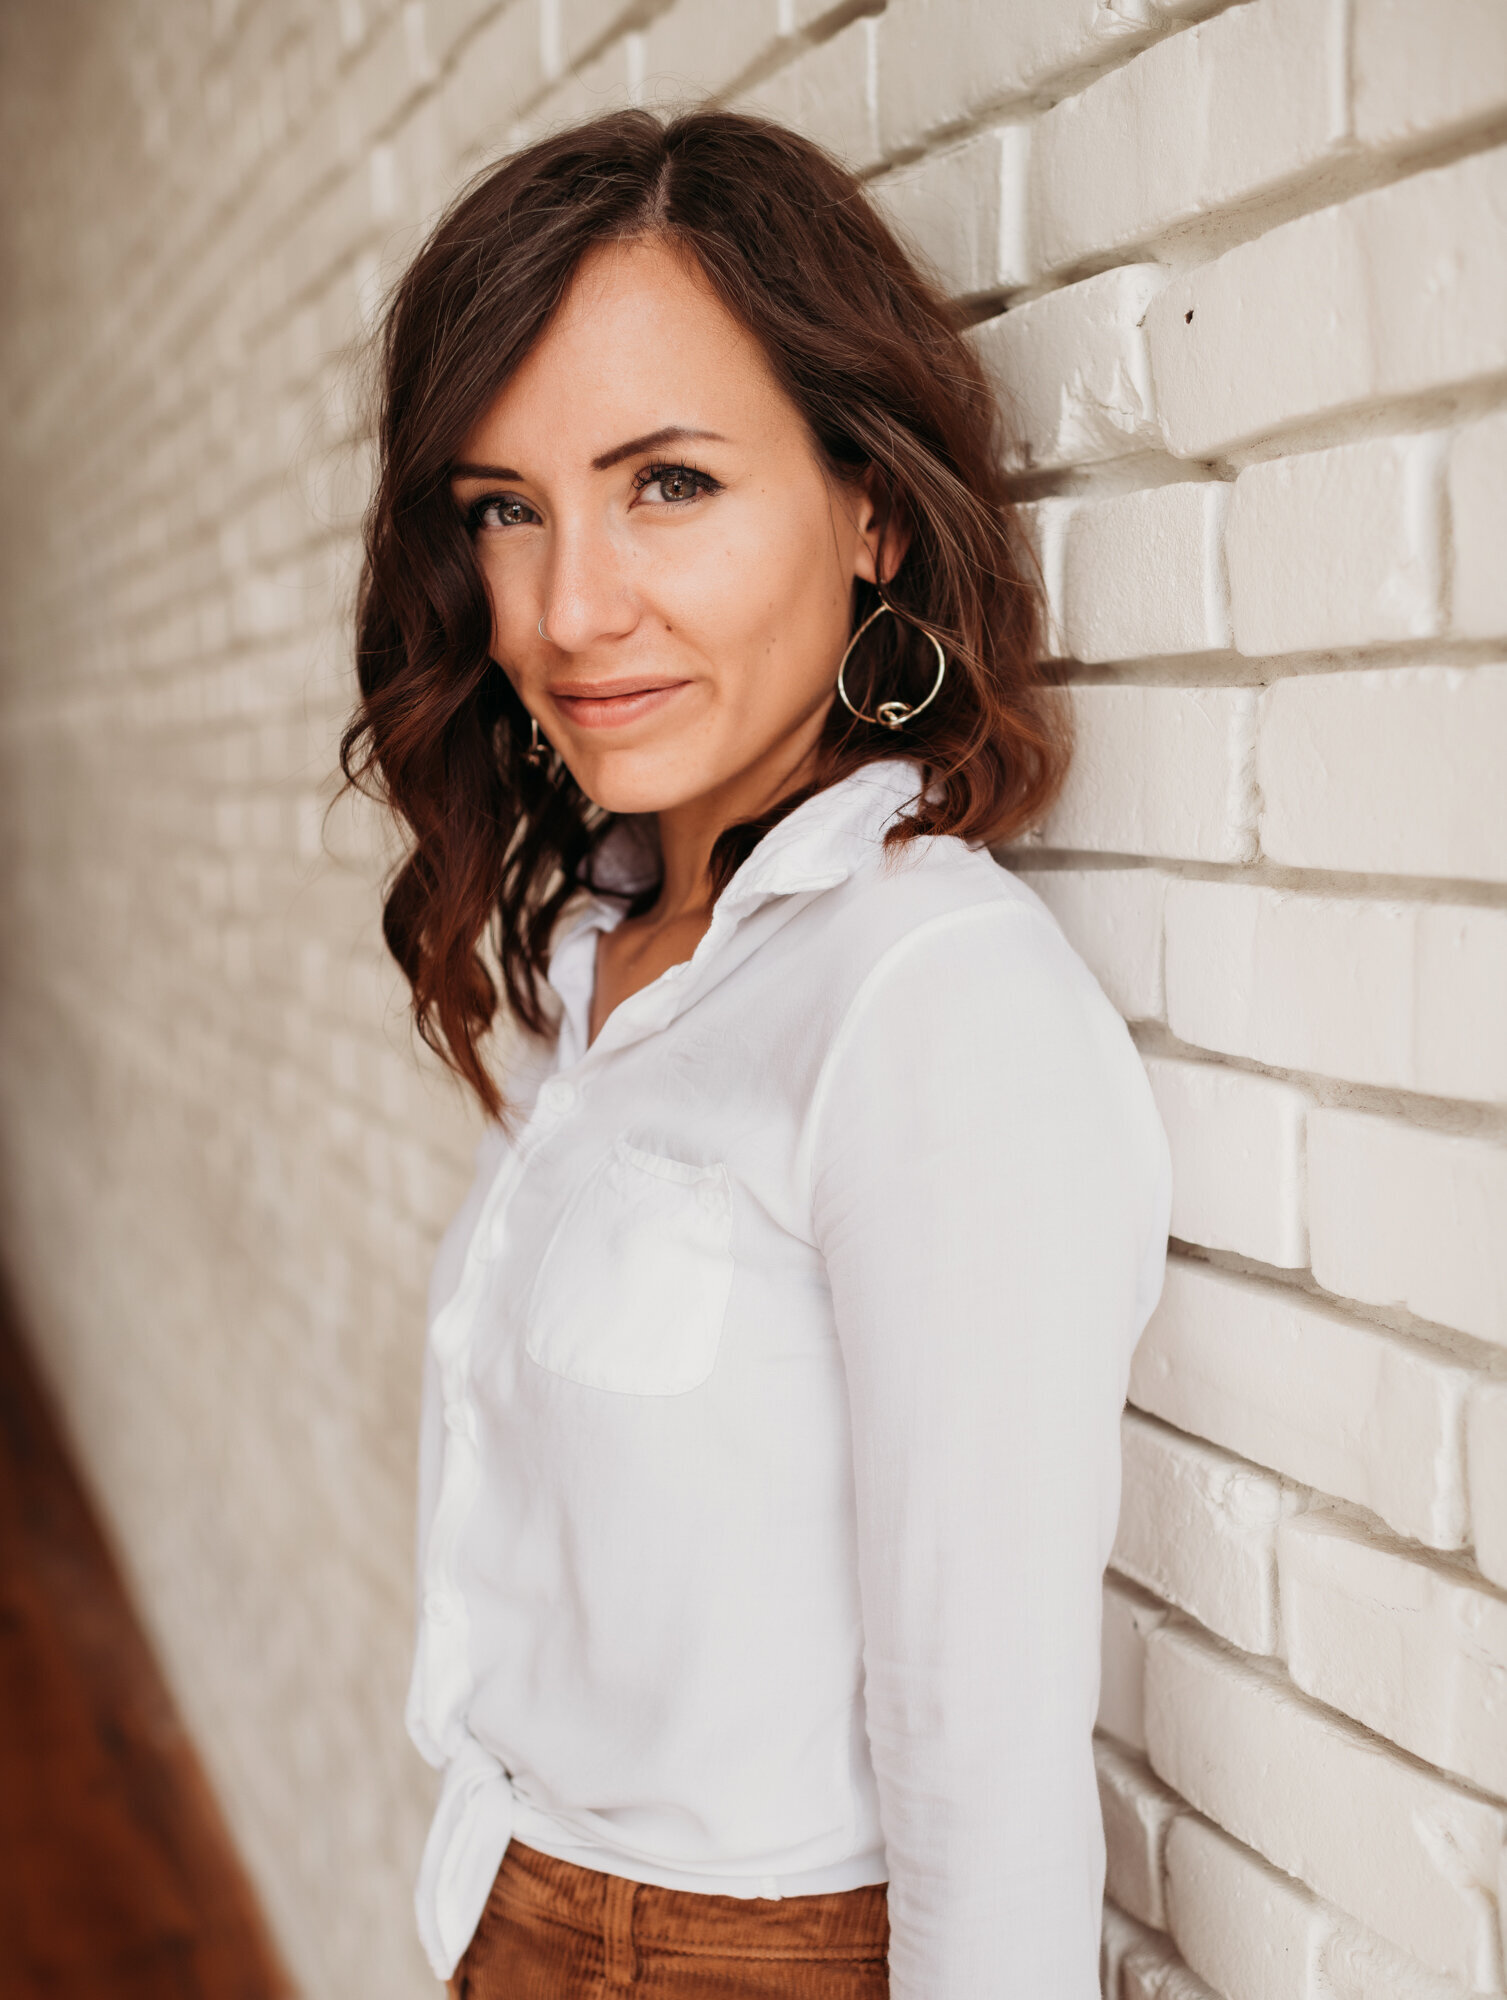 Branding Photographer,  a woman dressed professionally wears a blouse and leans against a white brick wall indoors